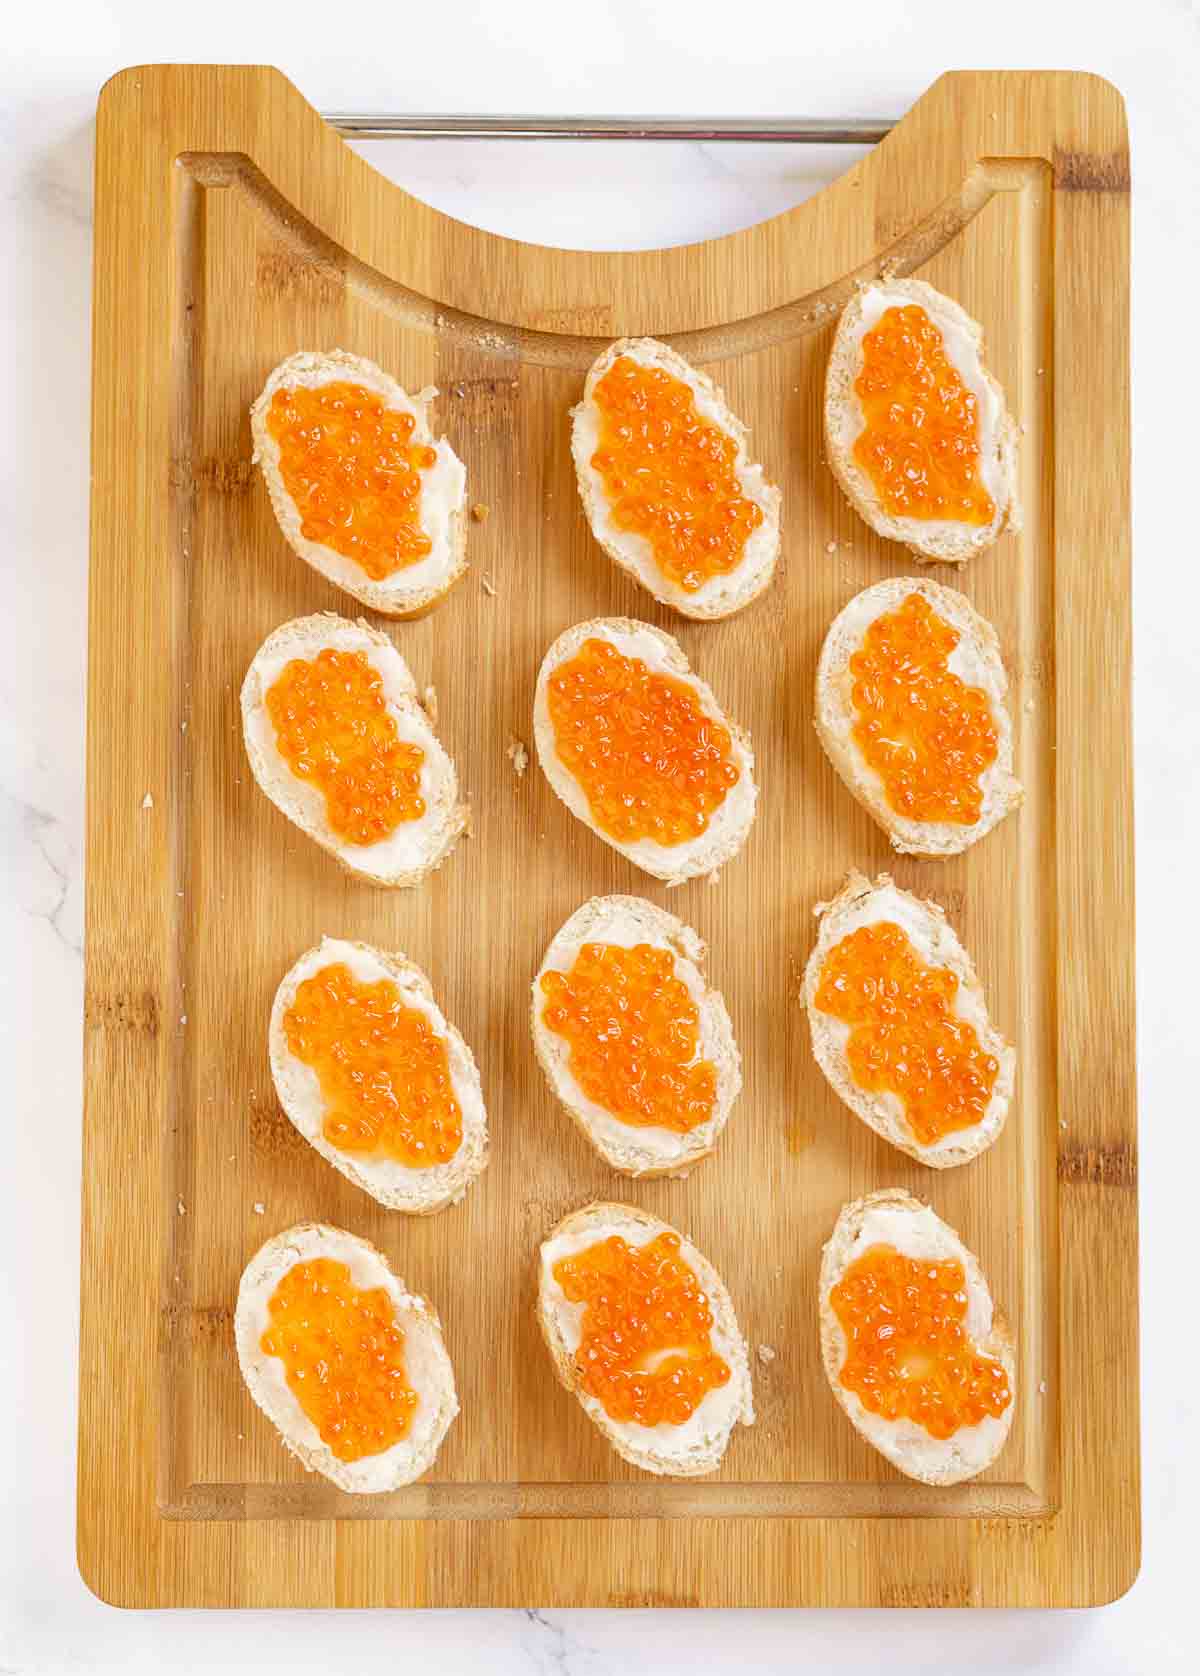 Baguette slices topped with butter and salmon roe